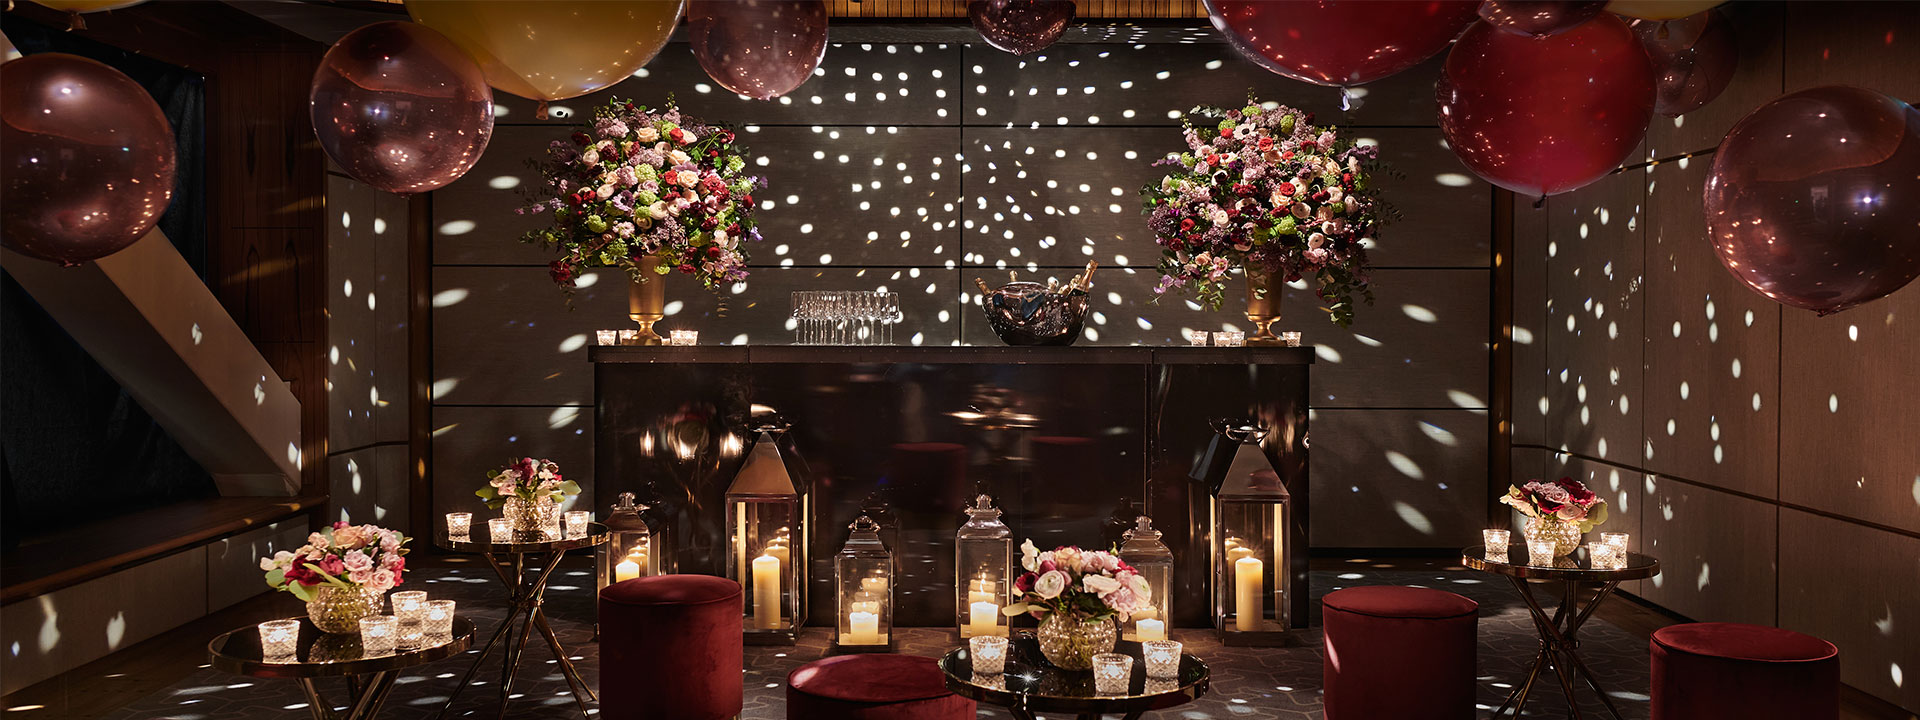 The Knightsbridge Room is decorated with balloons, candles and flowers for a warm and social atmosphere.